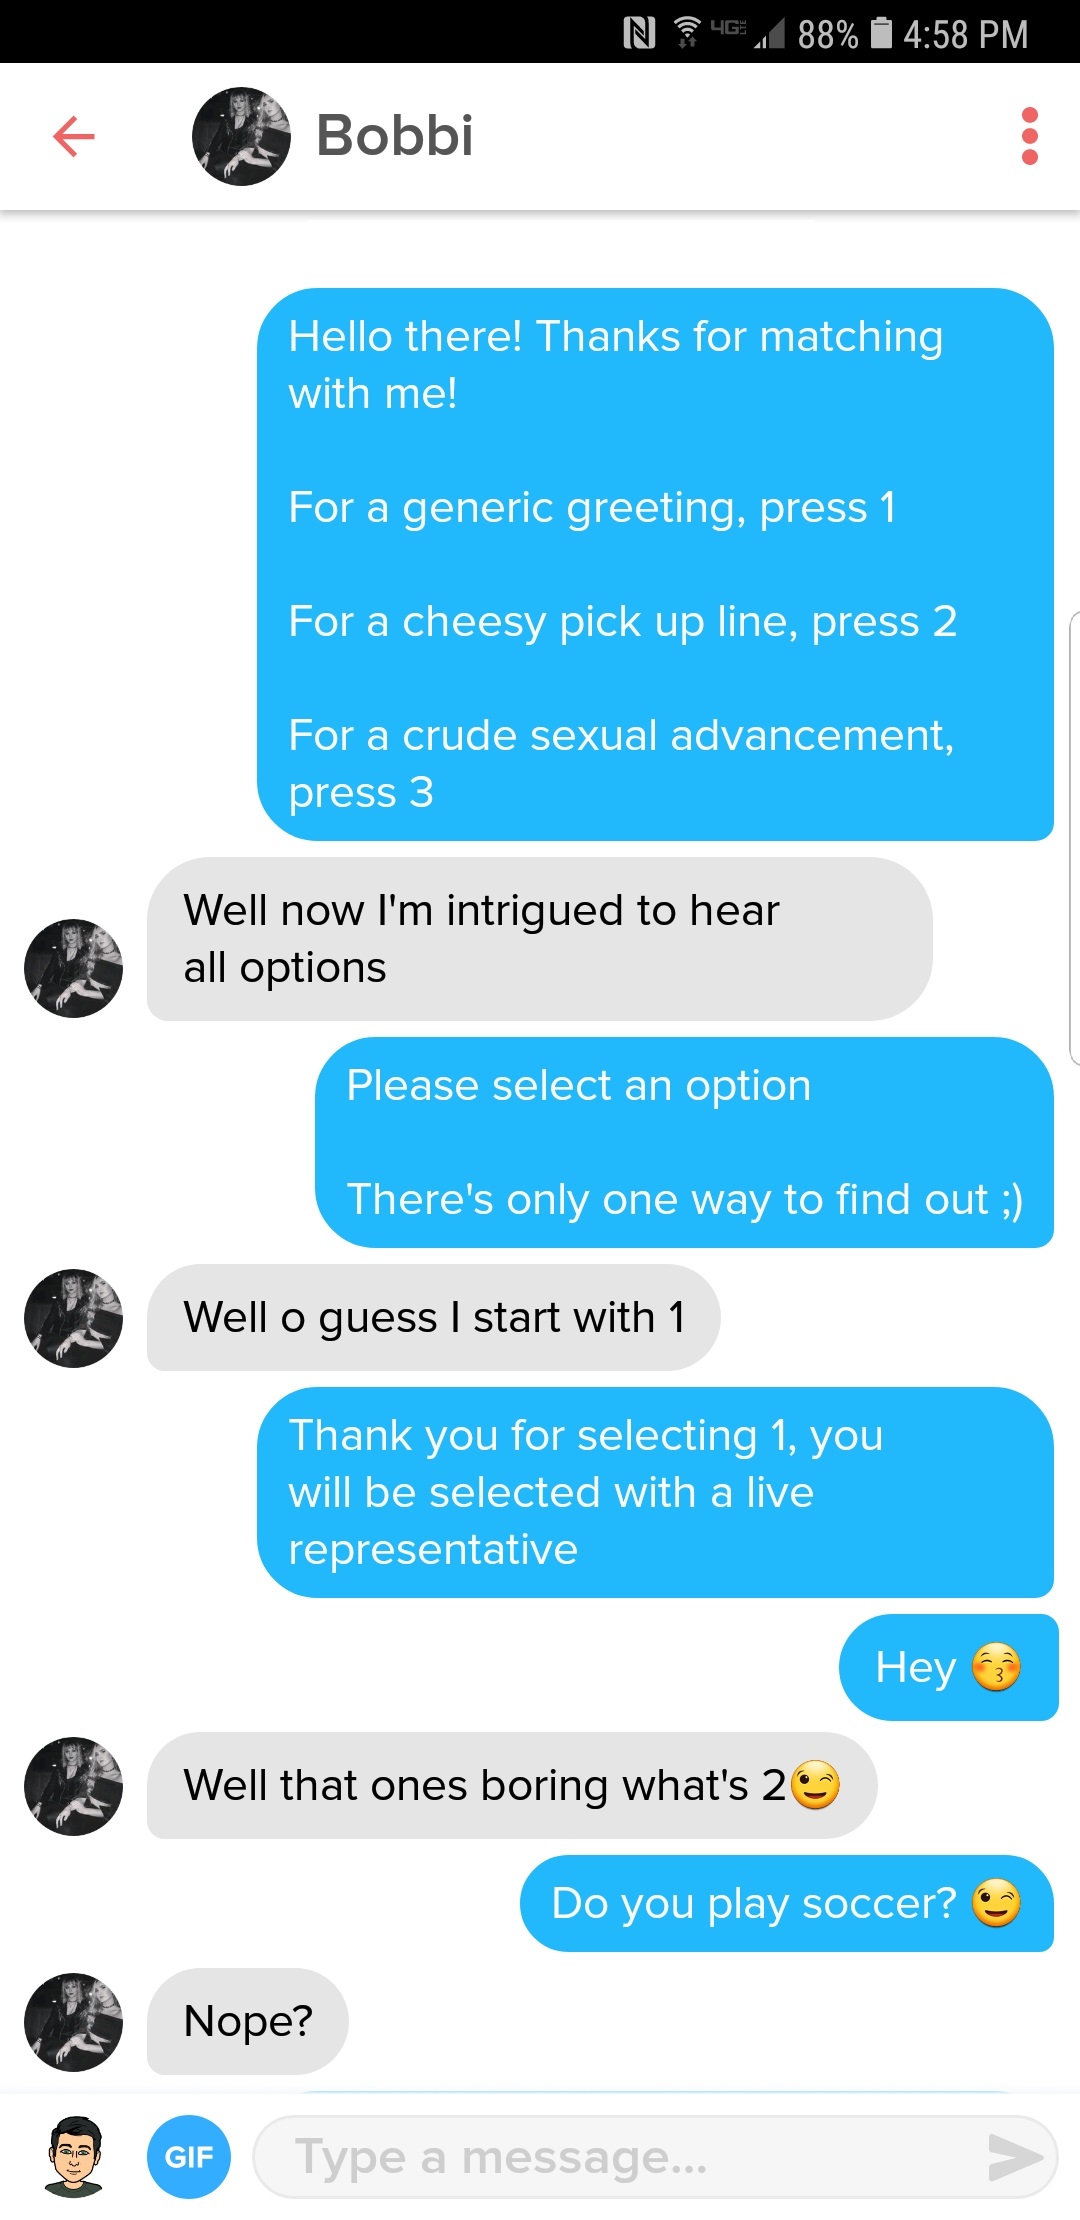 Smooth guy gets number from bimbo on tinder - Gallery | eBaum's World